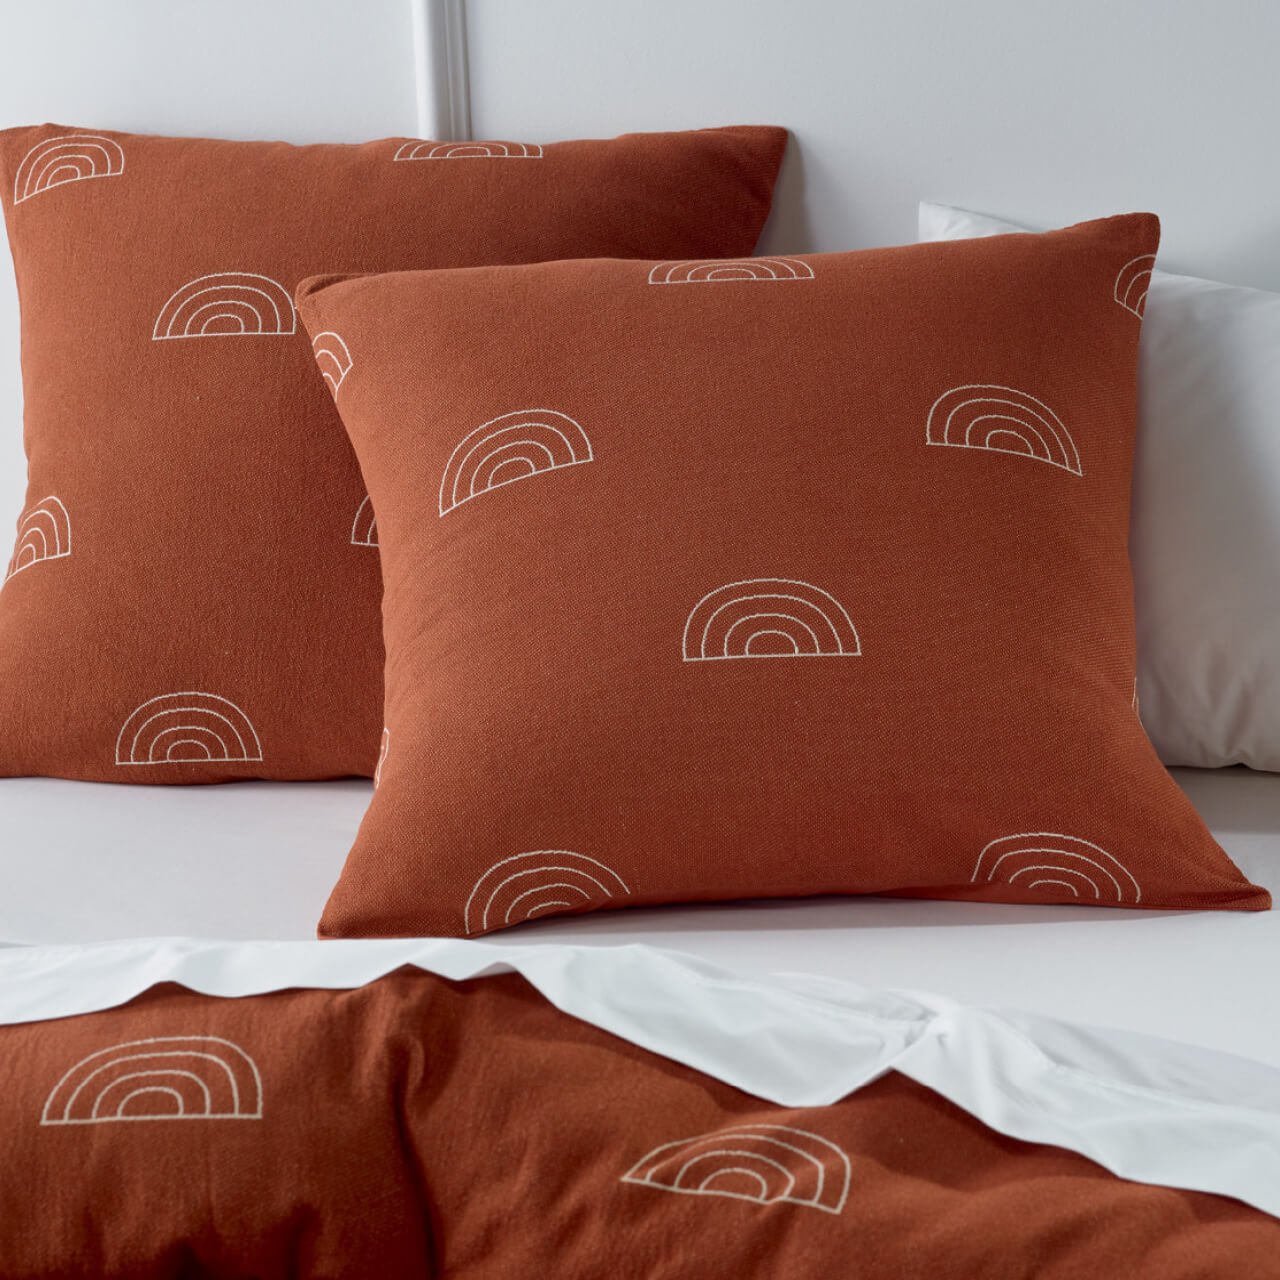 Zoomed in shot of Arco European Pillowcases on bed